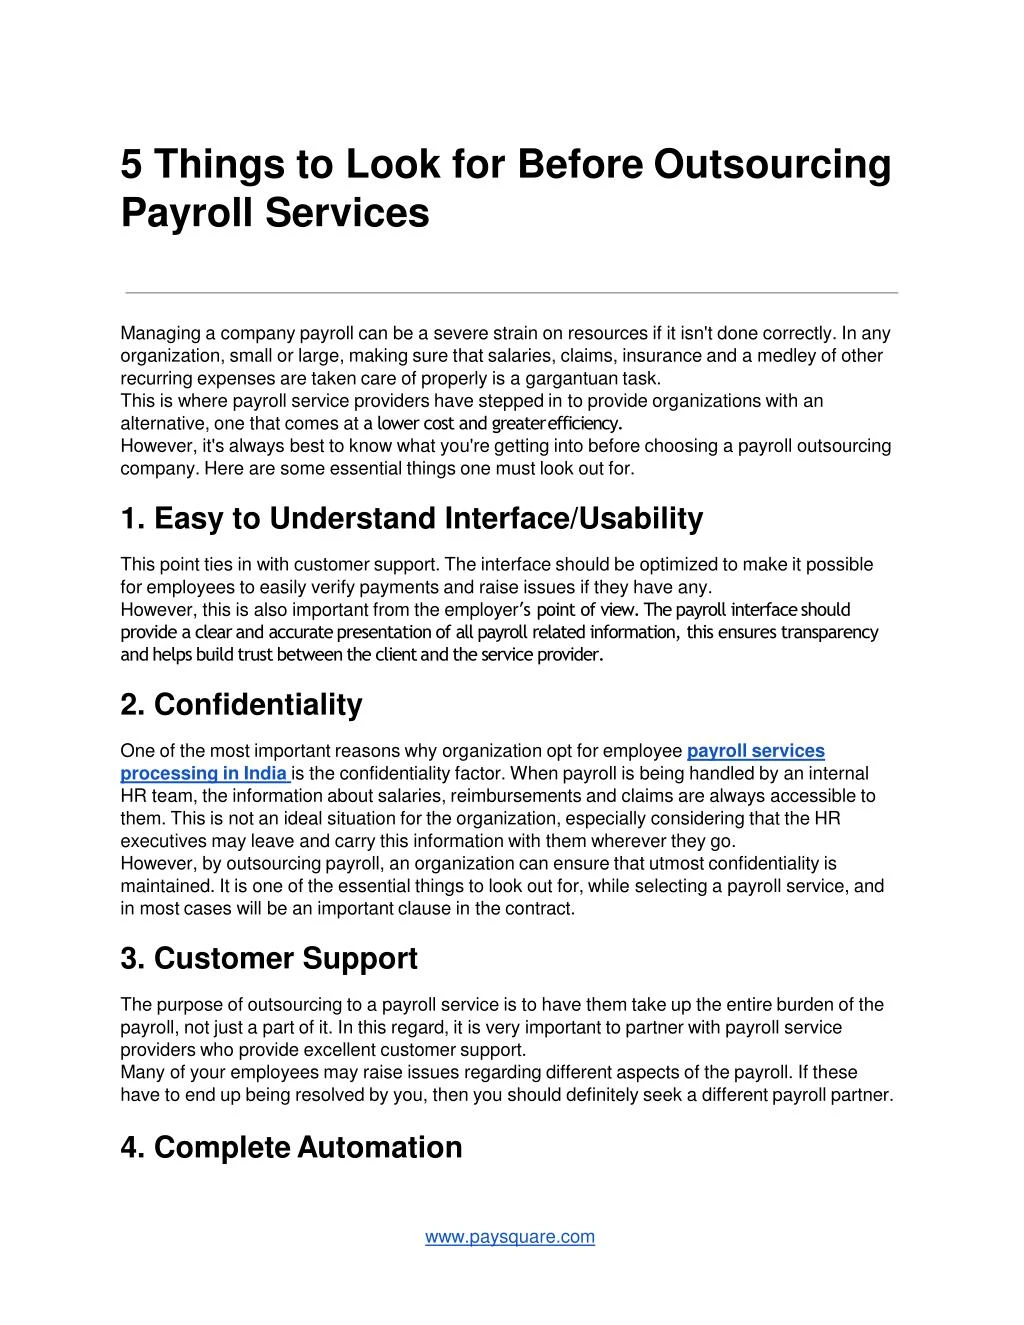 5 things to look for before outsourcing payroll services